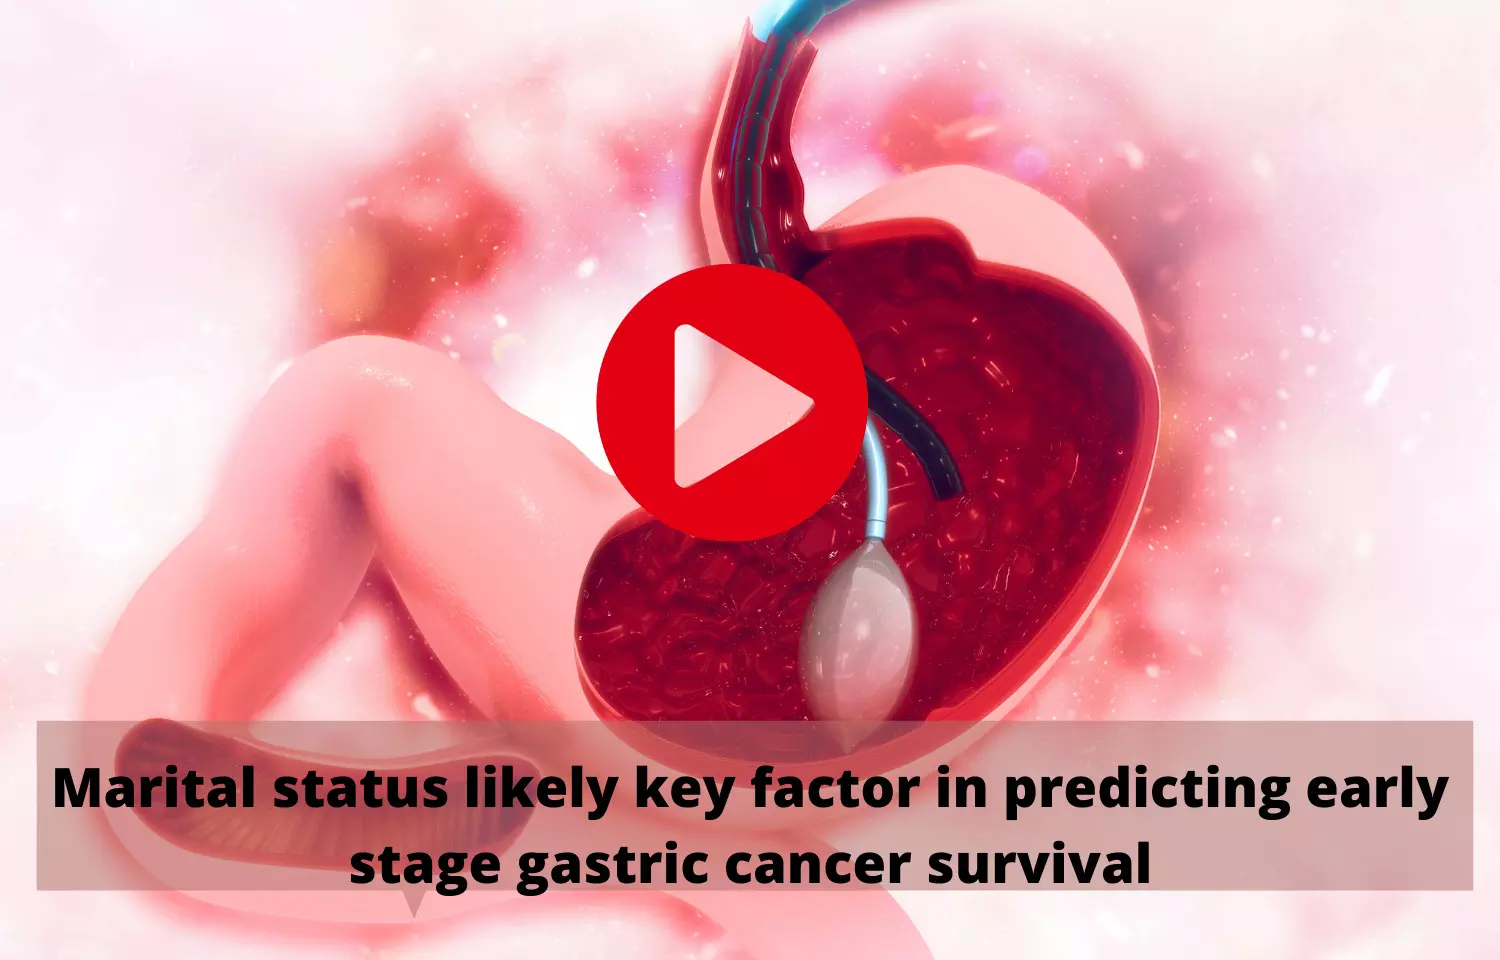 Marital status likely key factor in predicting early stage gastric cancer survival